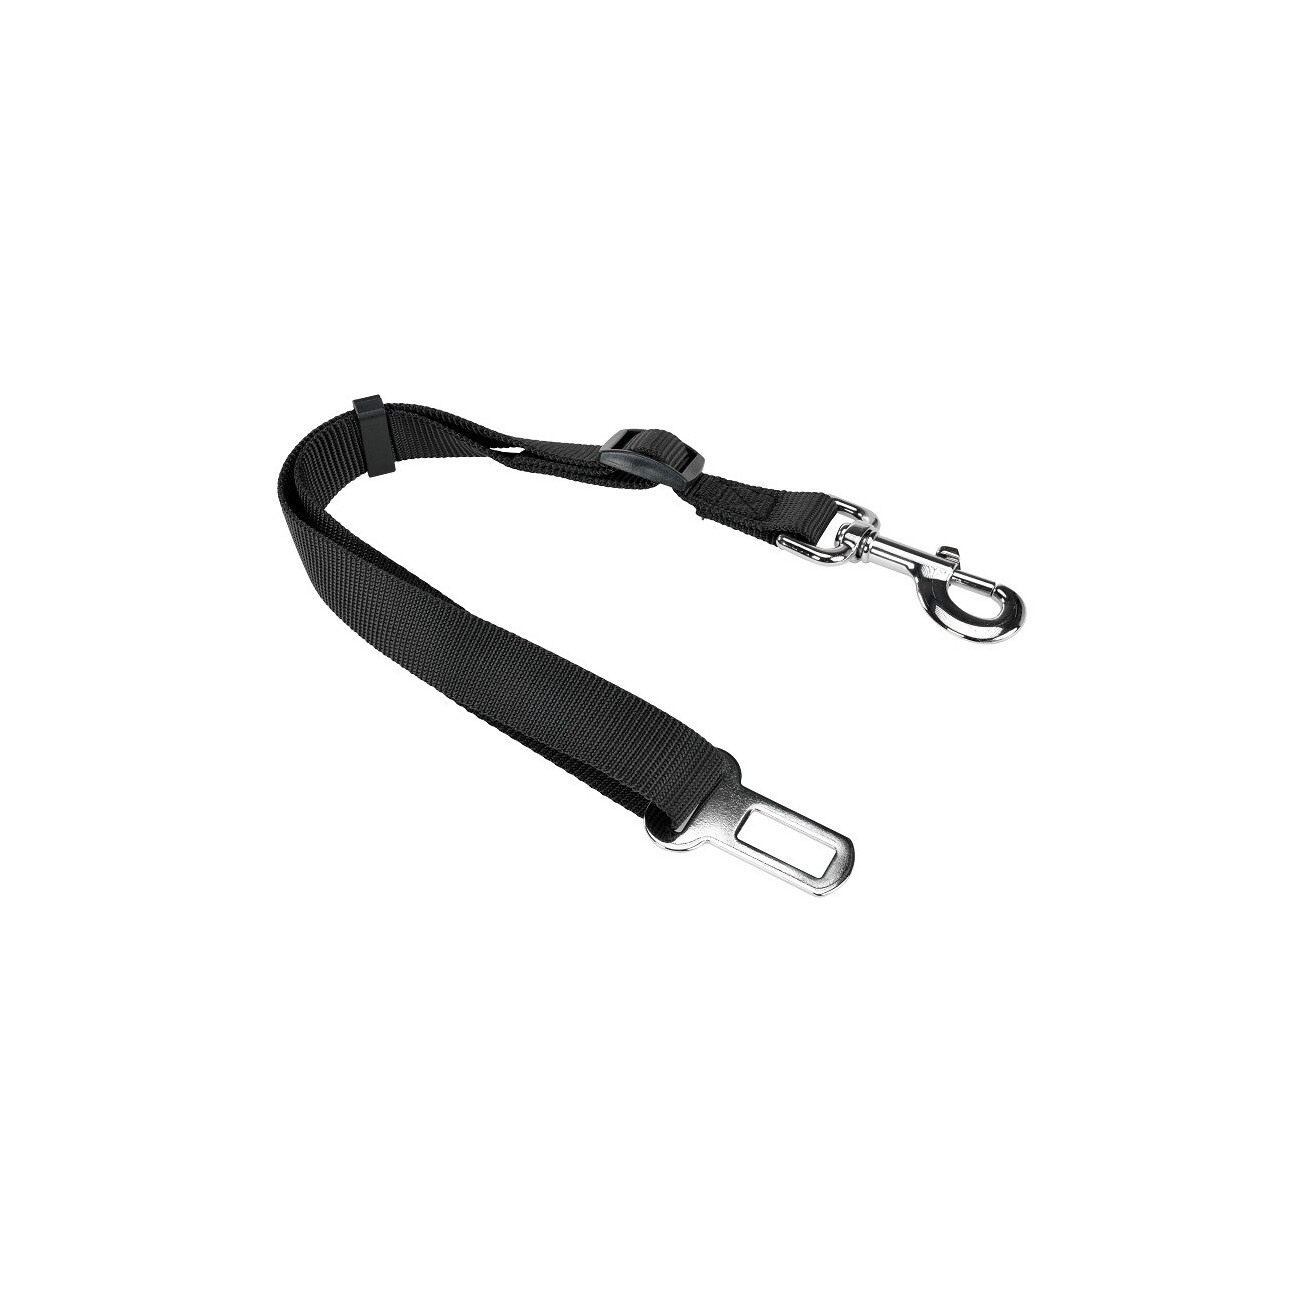 AniOne seat belt with buckle